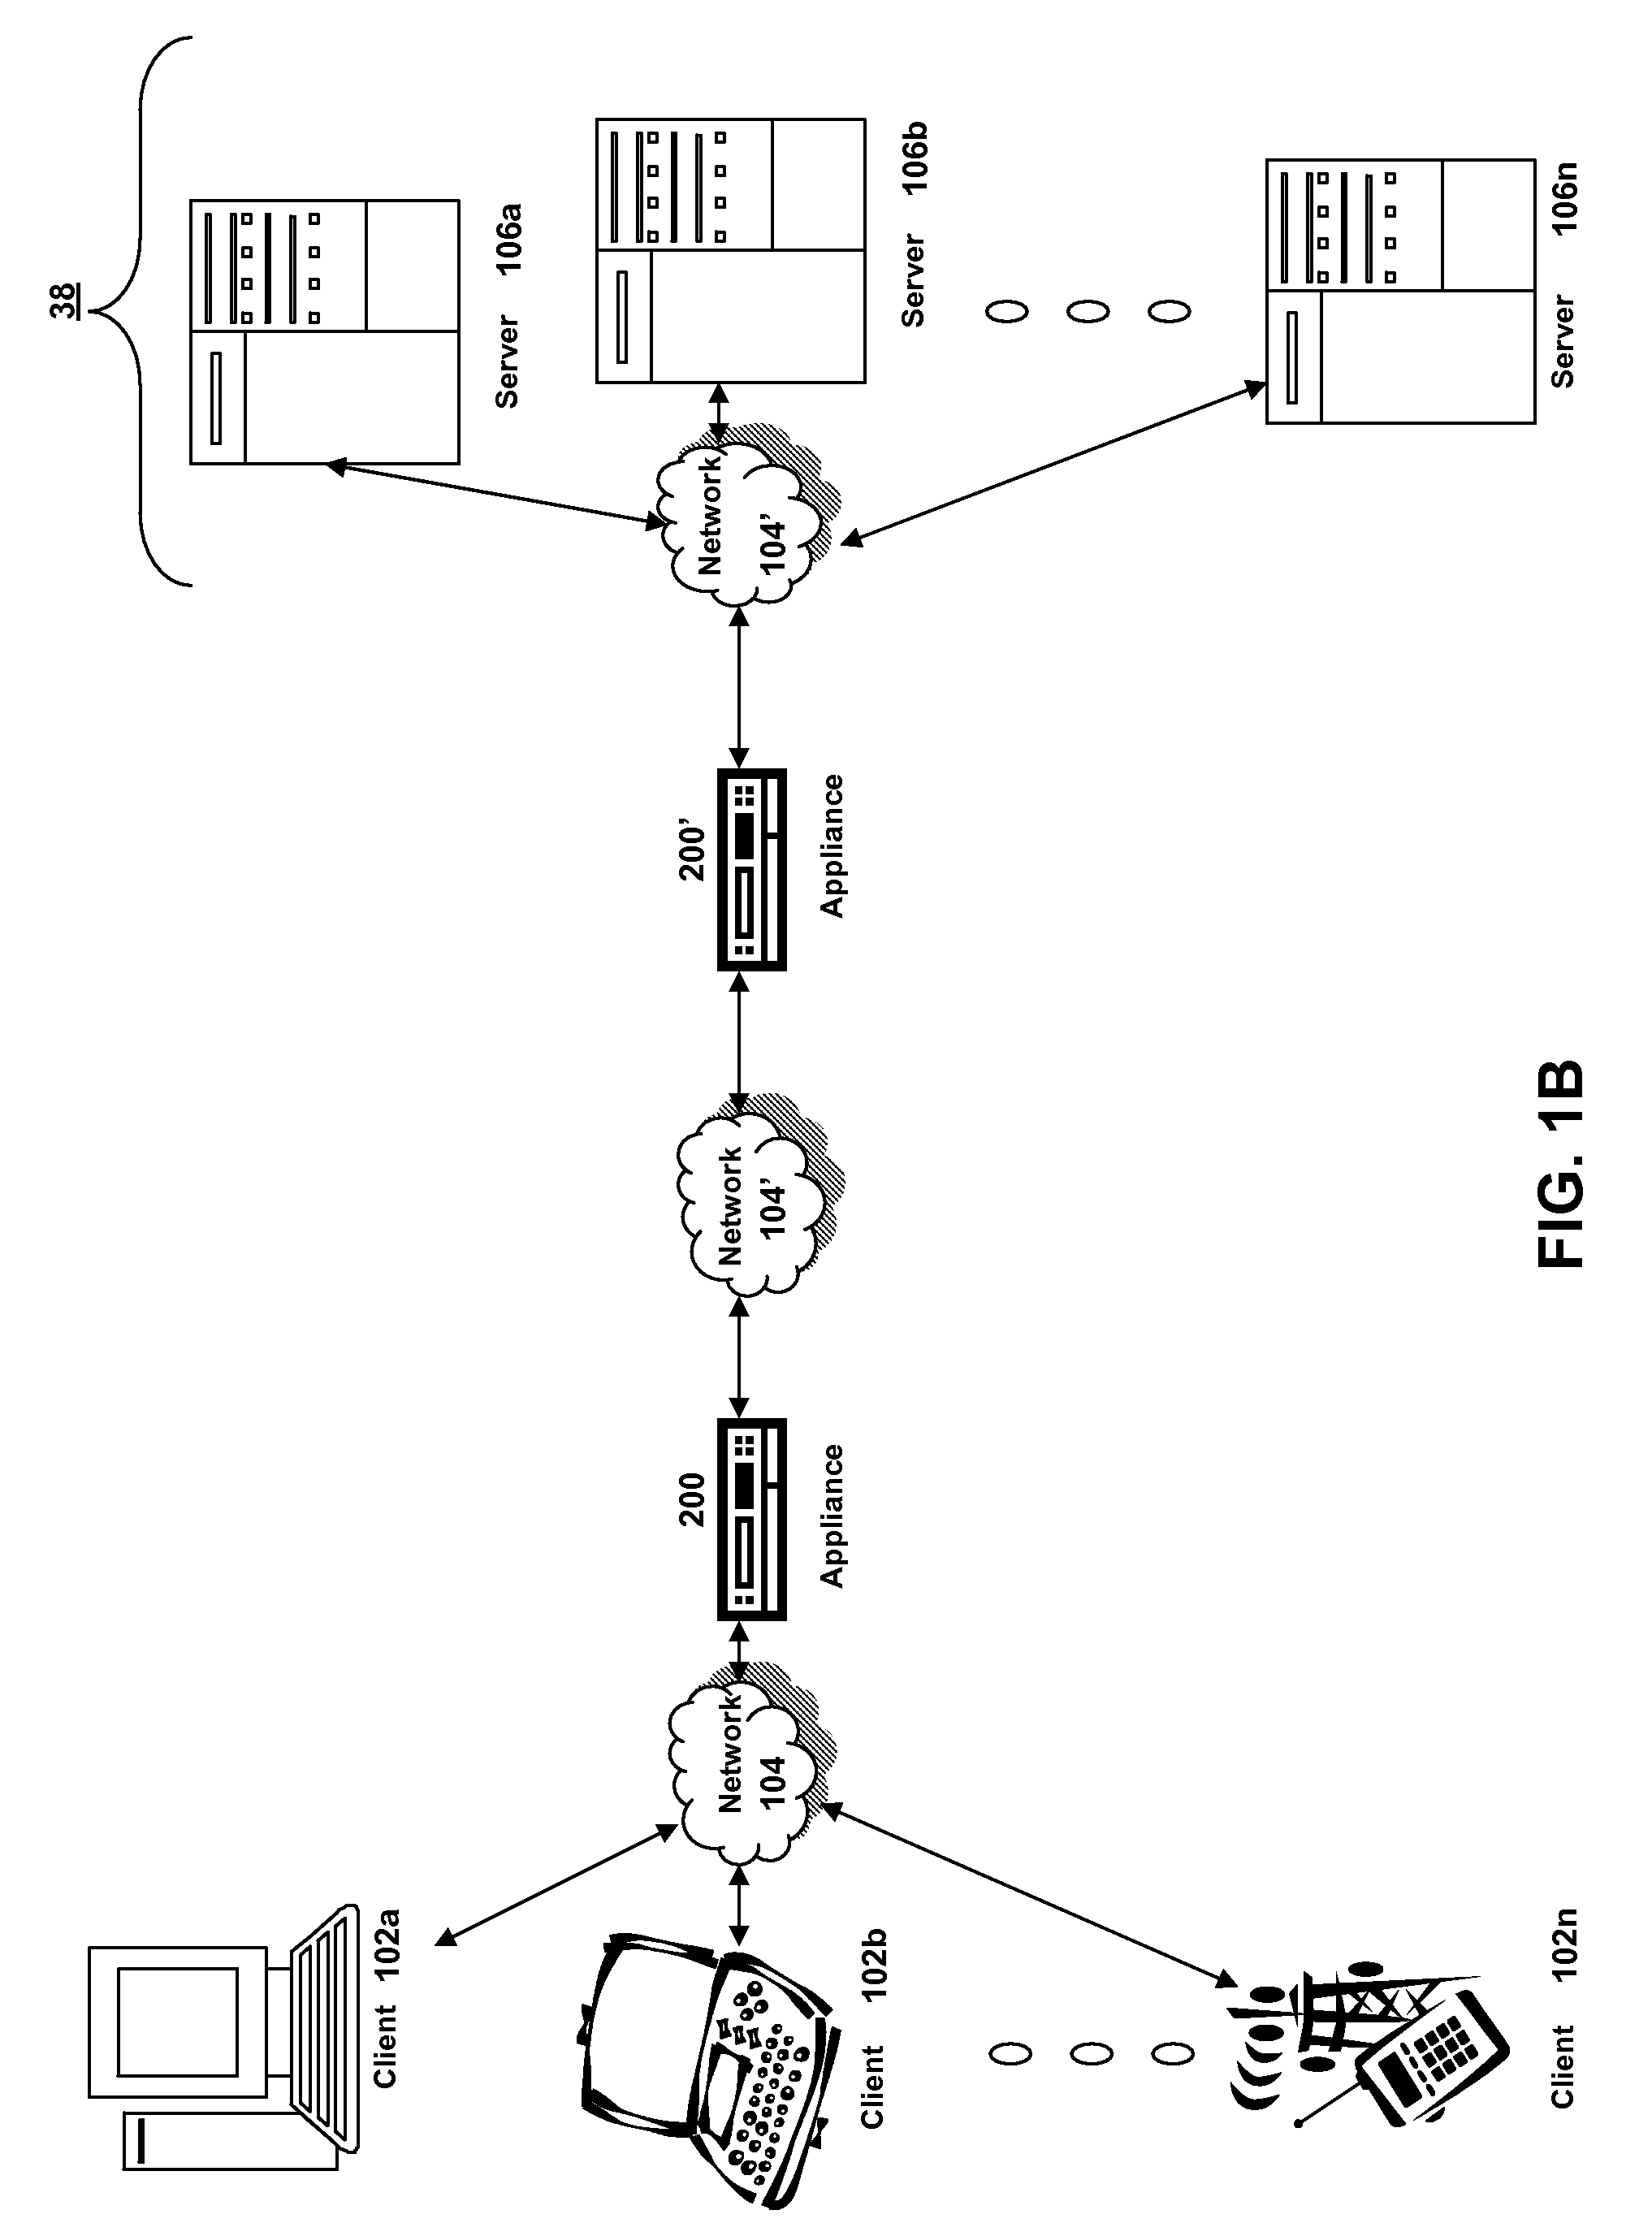 Systems and Methods for Providing Dynamic Spillover of Virtual Servers Based on Bandwidth